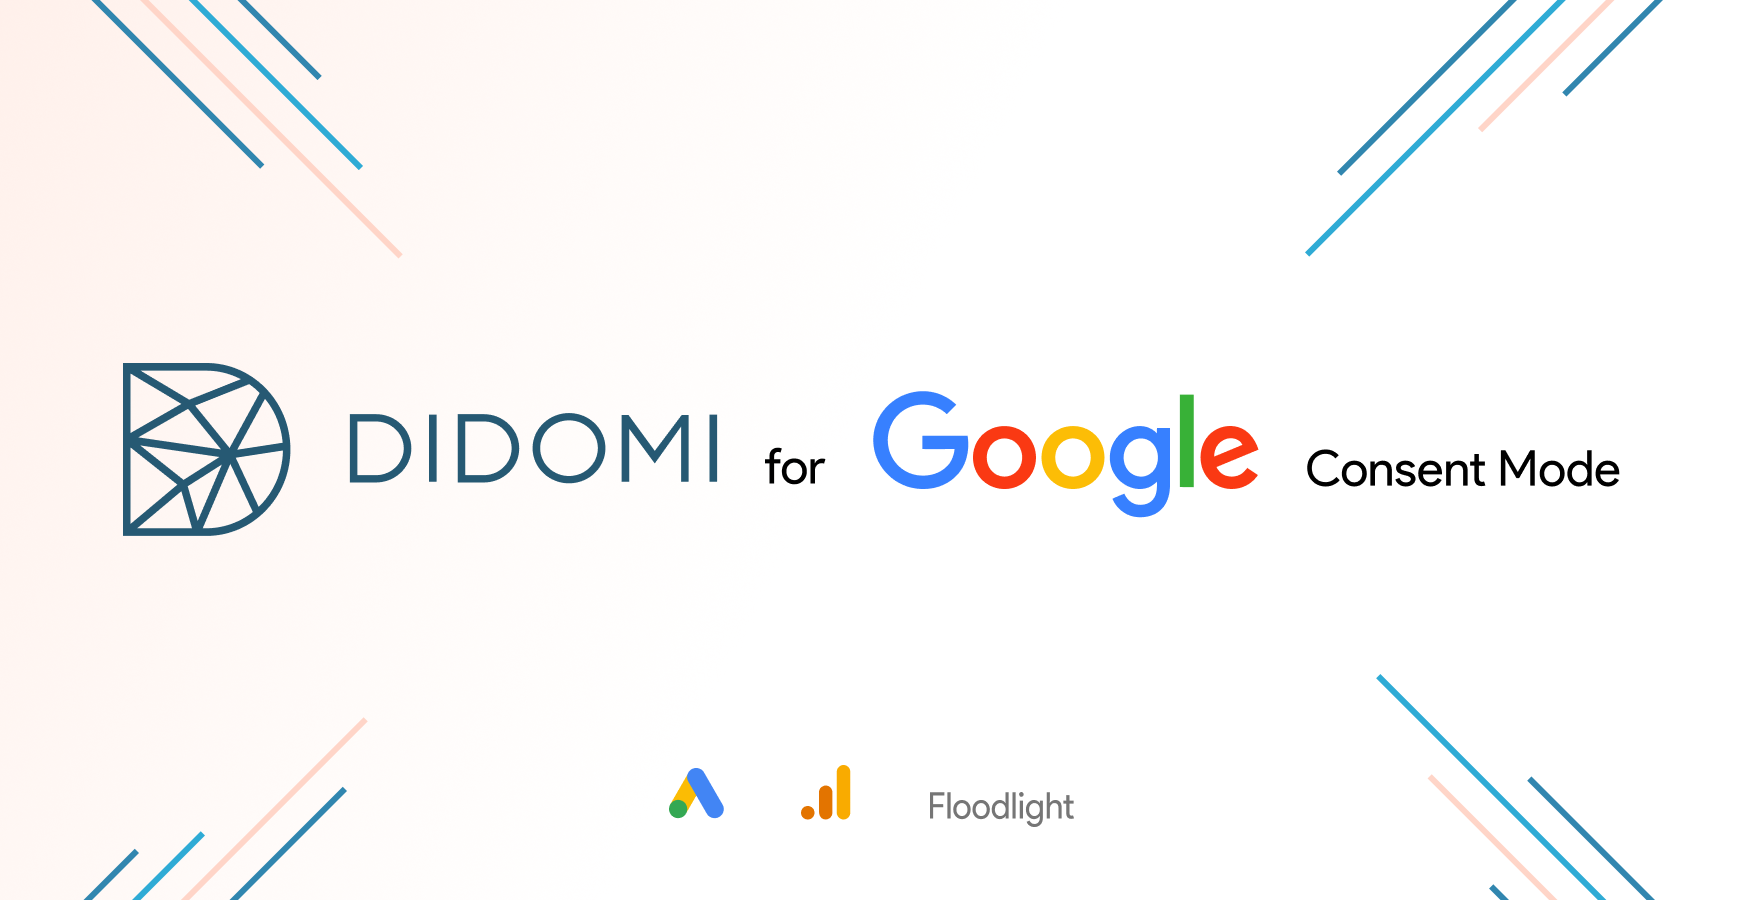 Google Consent Mode for Didomi 